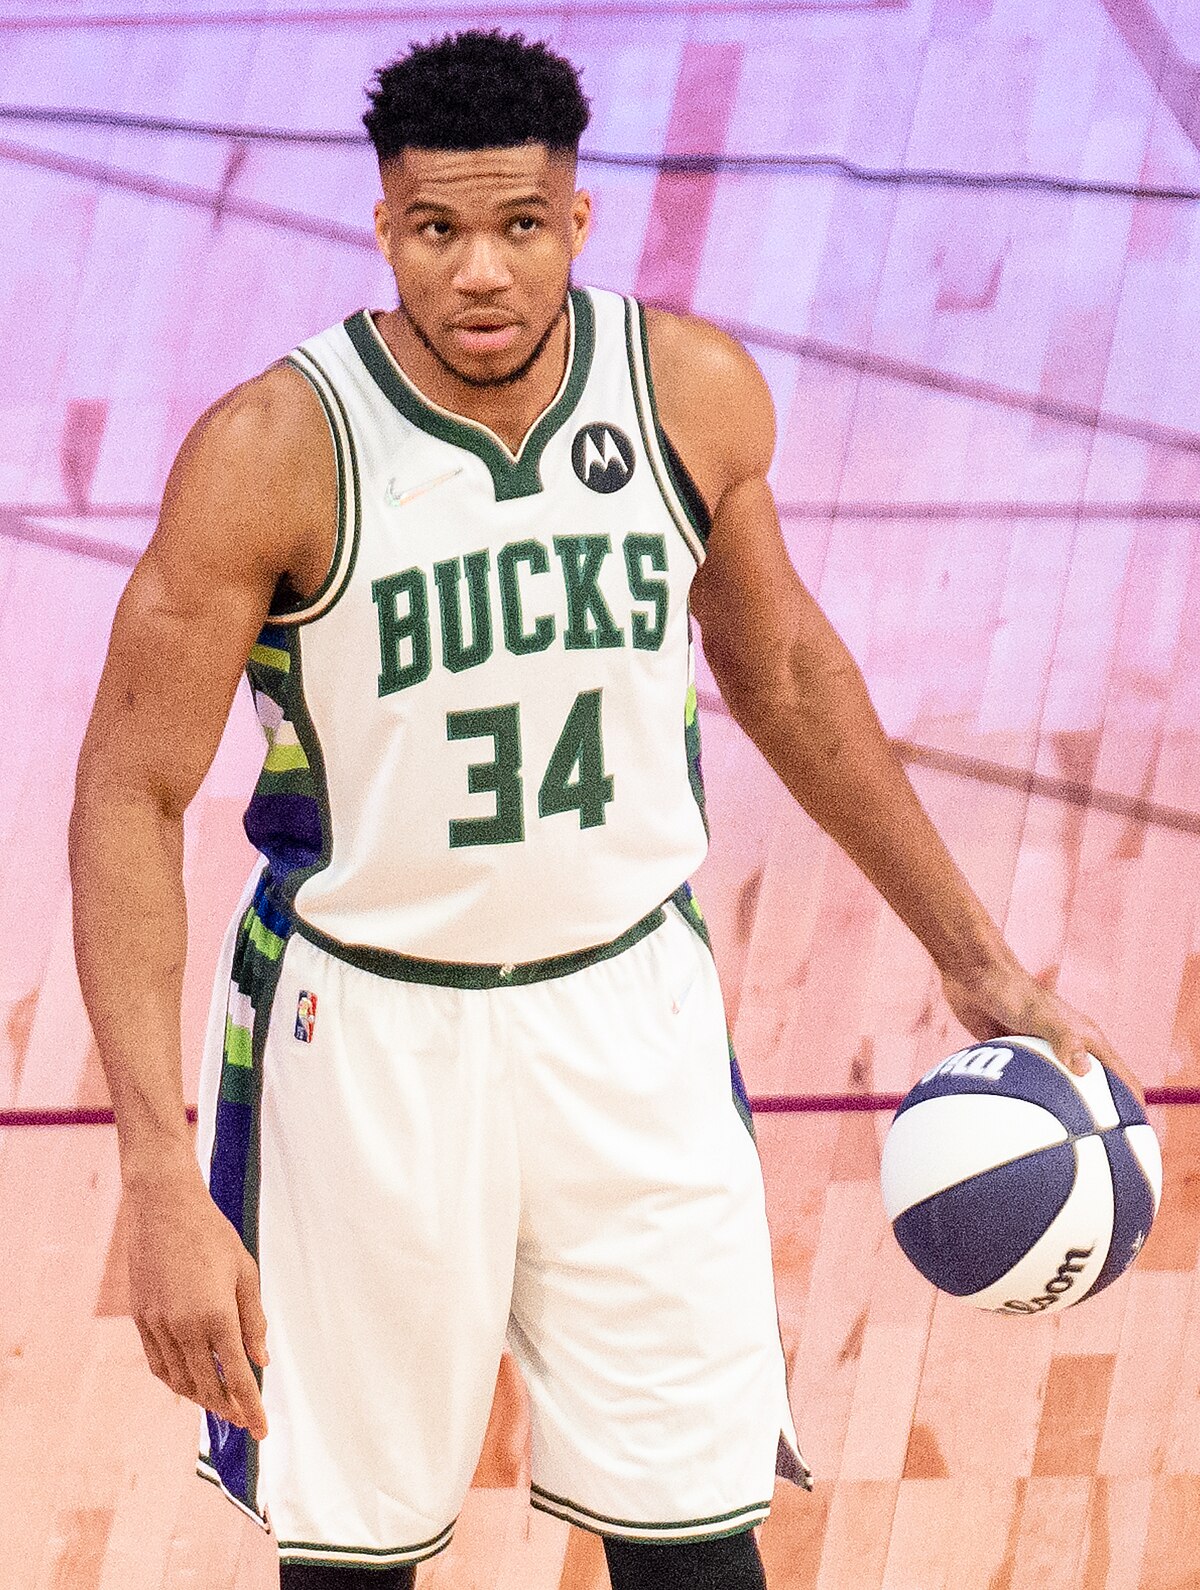 Giannis Antetokounmpo is a professional basketball player